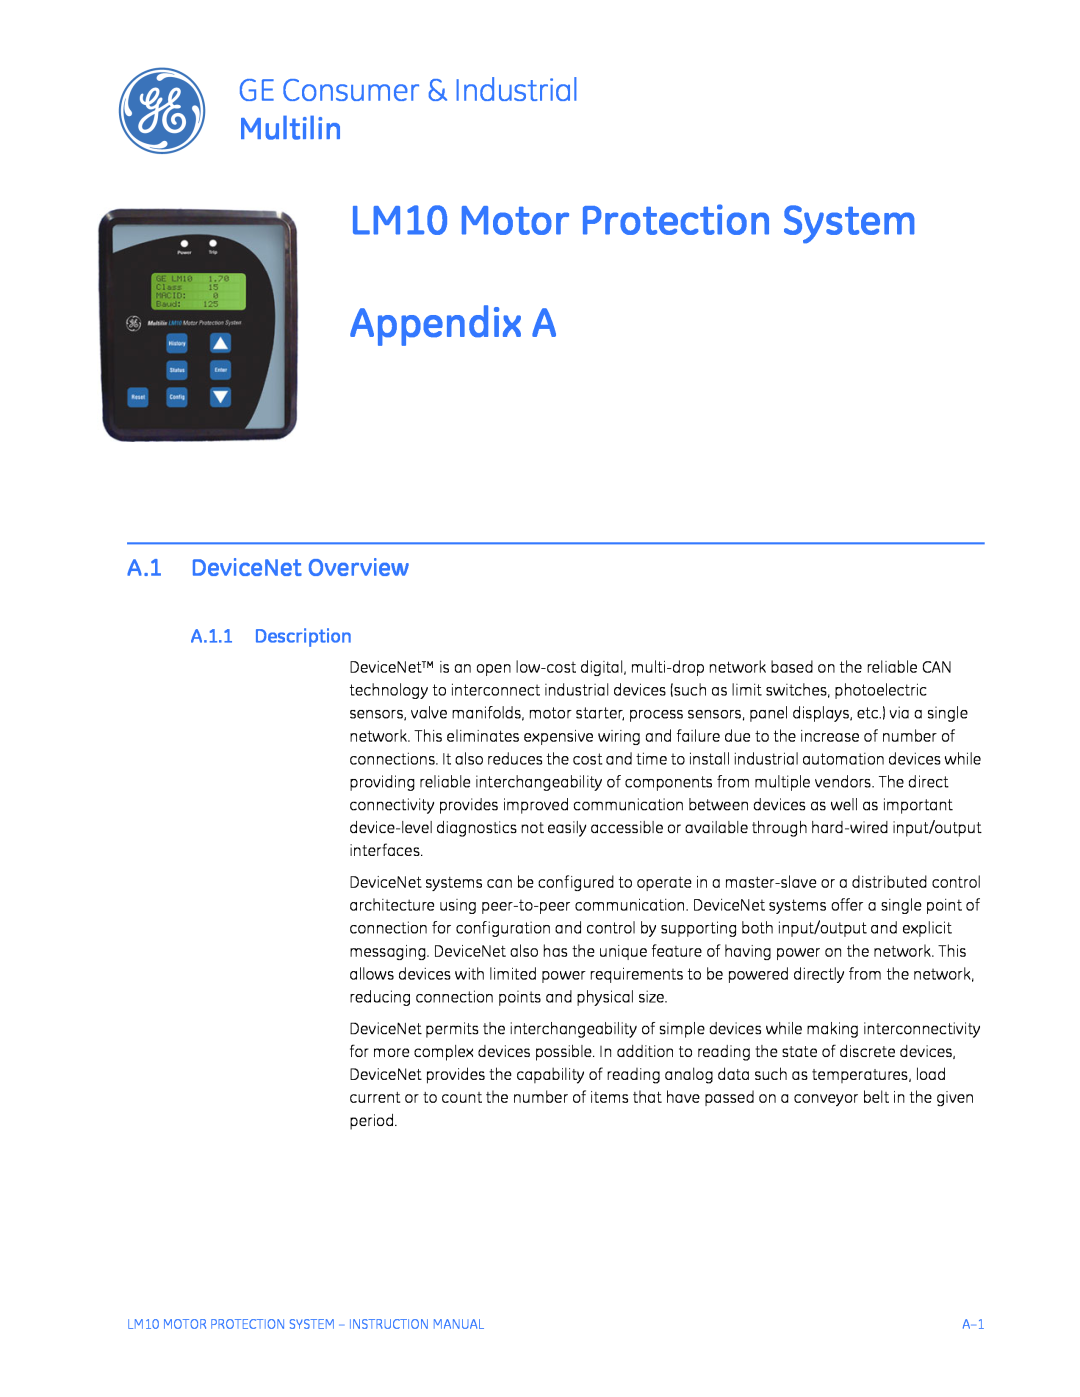 GE LM10 Motor Protection System Appendix A, A.1 DeviceNet Overview, A.1.1 Description, GE Consumer & Industrial 